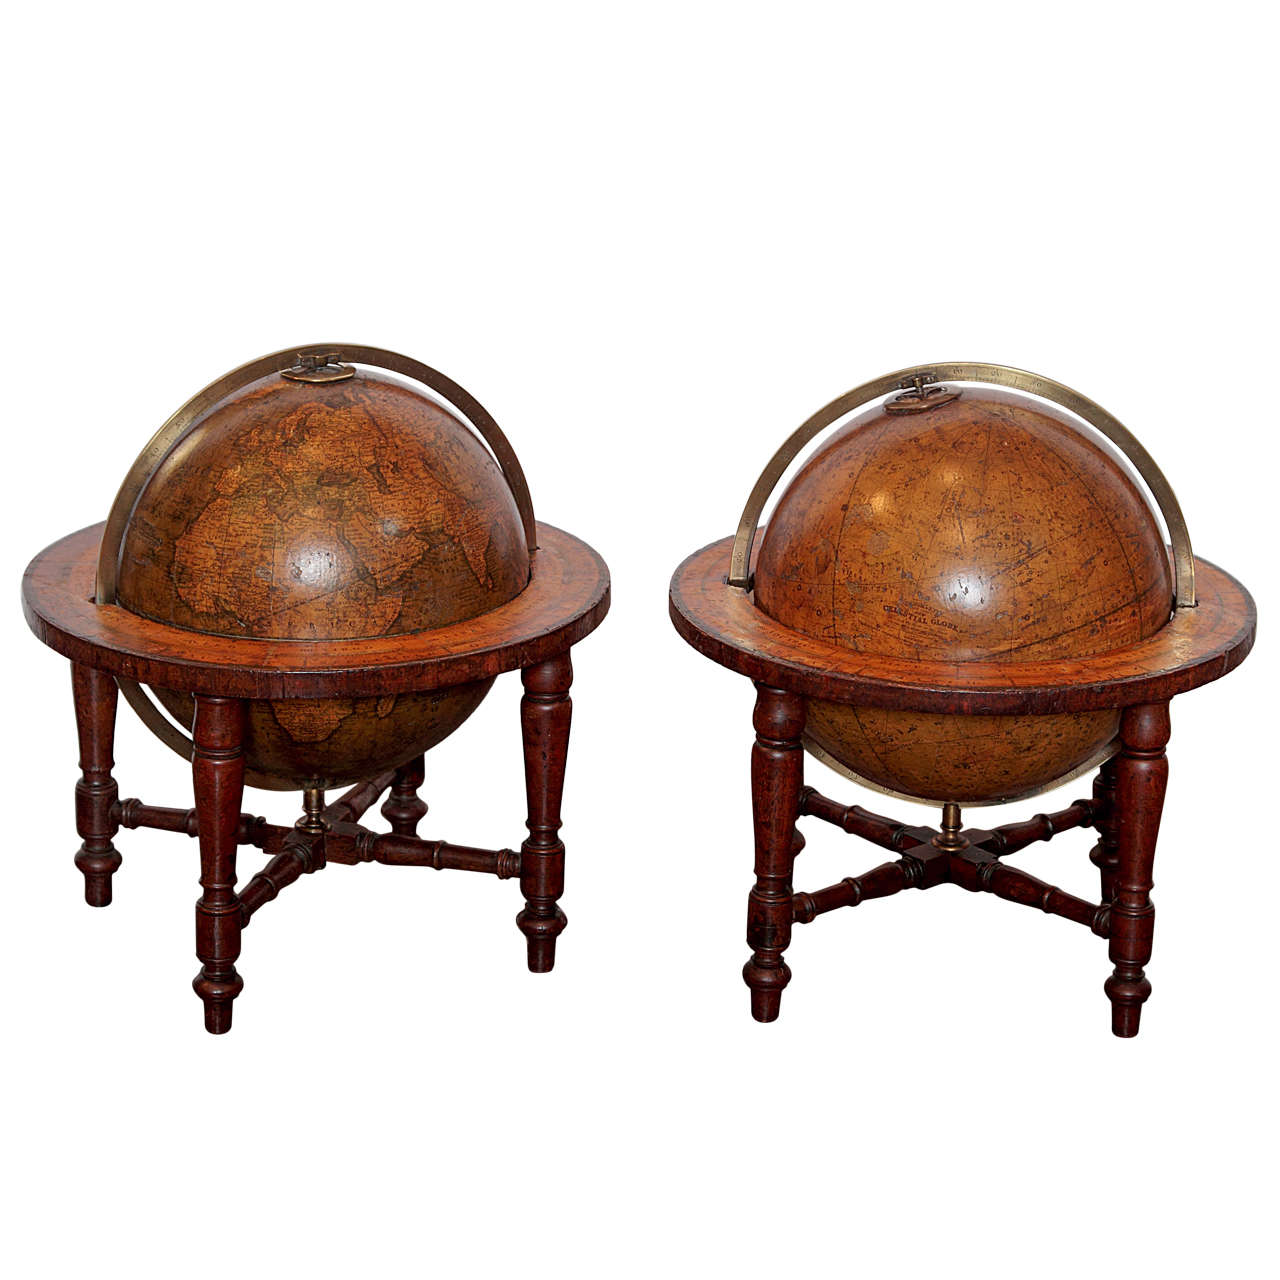 Pair of Important G.F Cruchley's Table Top Globes